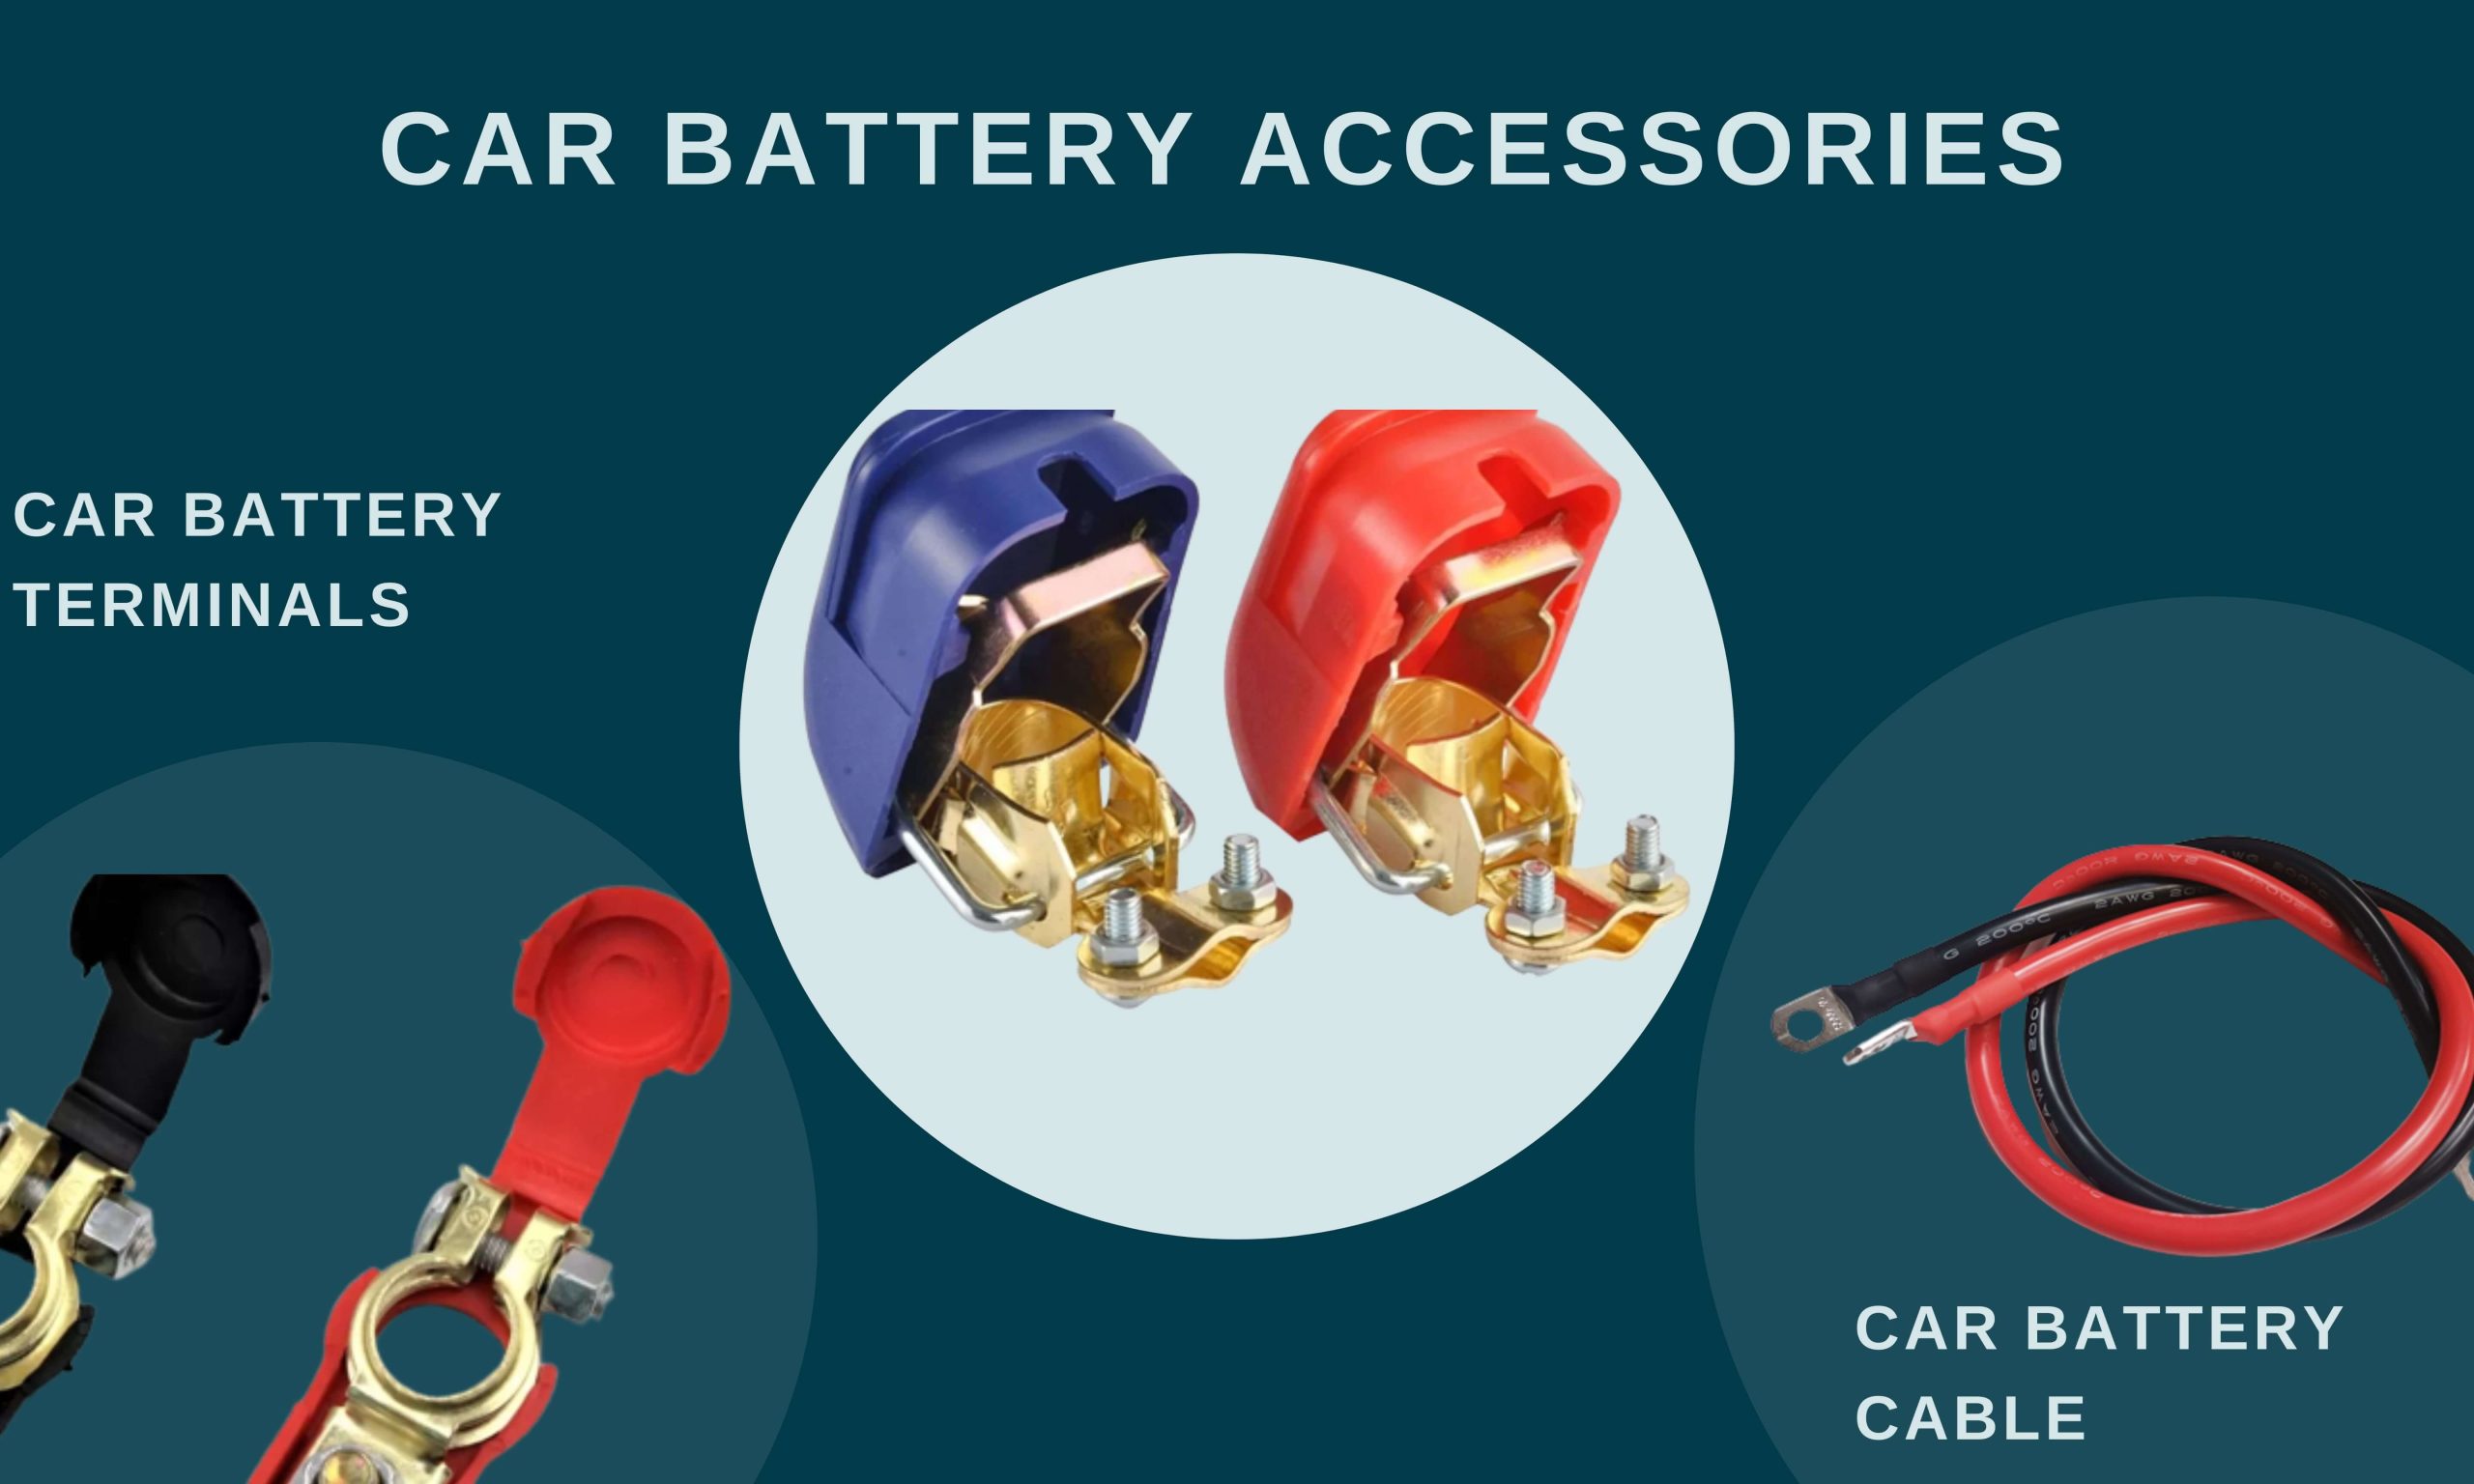 Car battery accessories 